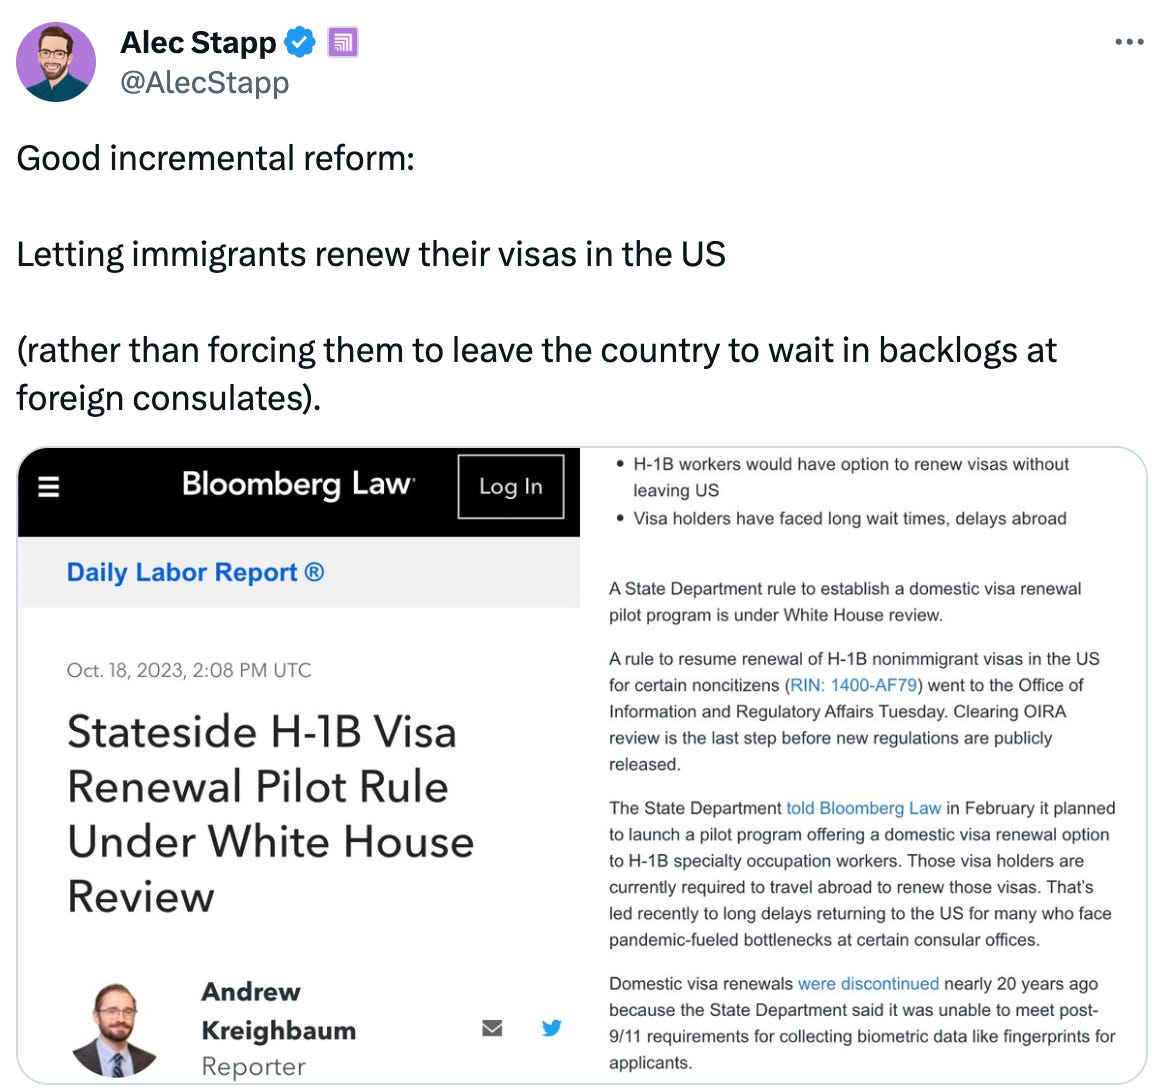  Alec Stapp  @AlecStapp Good incremental reform:  Letting immigrants renew their visas in the US  (rather than forcing them to leave the country to wait in backlogs at foreign consulates).